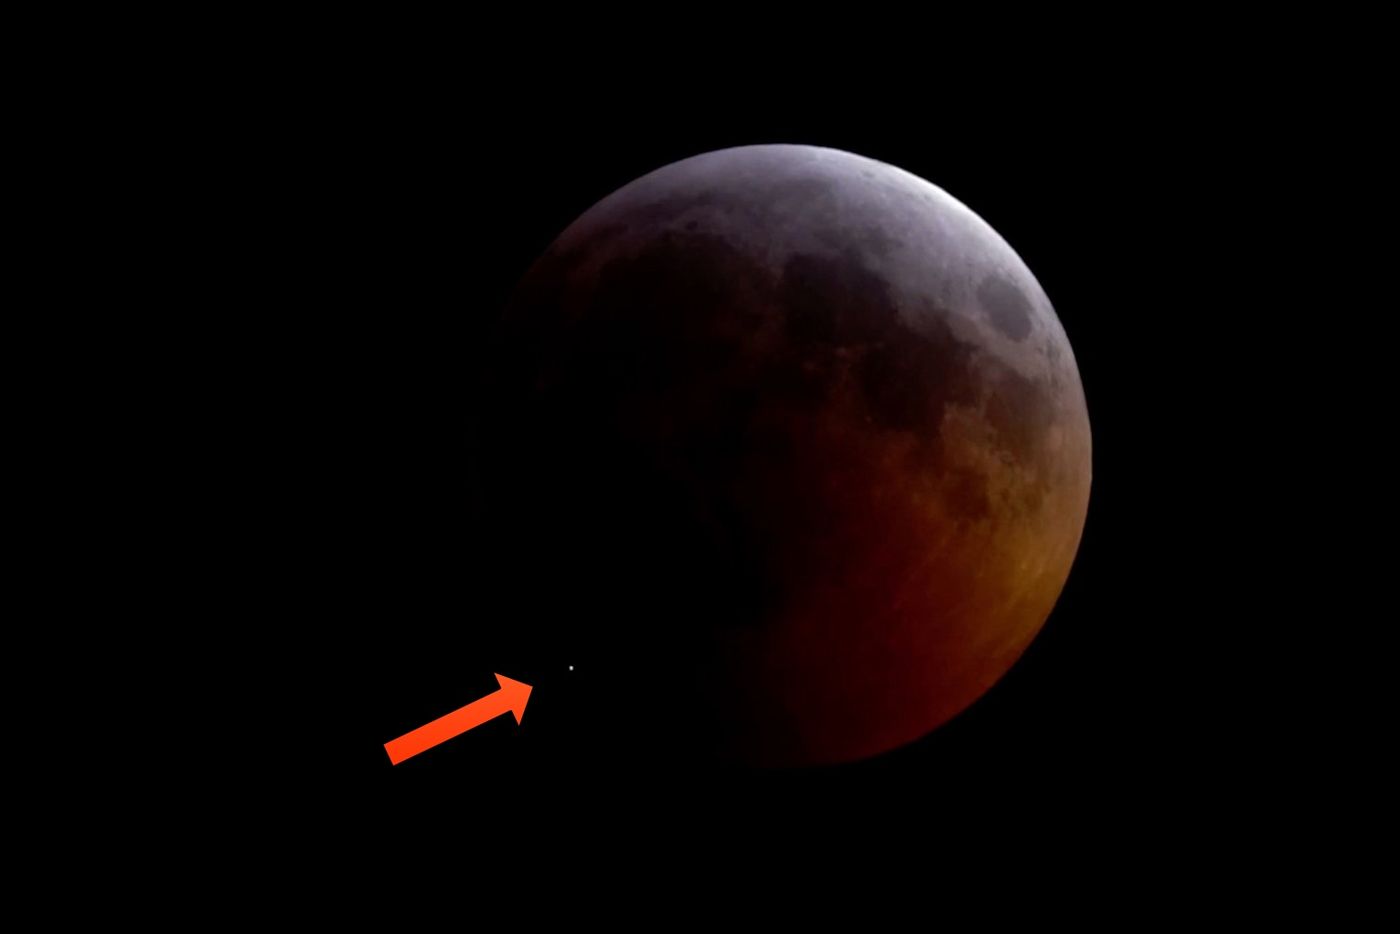 In this image, we see the white dot on the lunar surface depicting the unexpected meteorite strike during this past weekend's lunar eclipse.